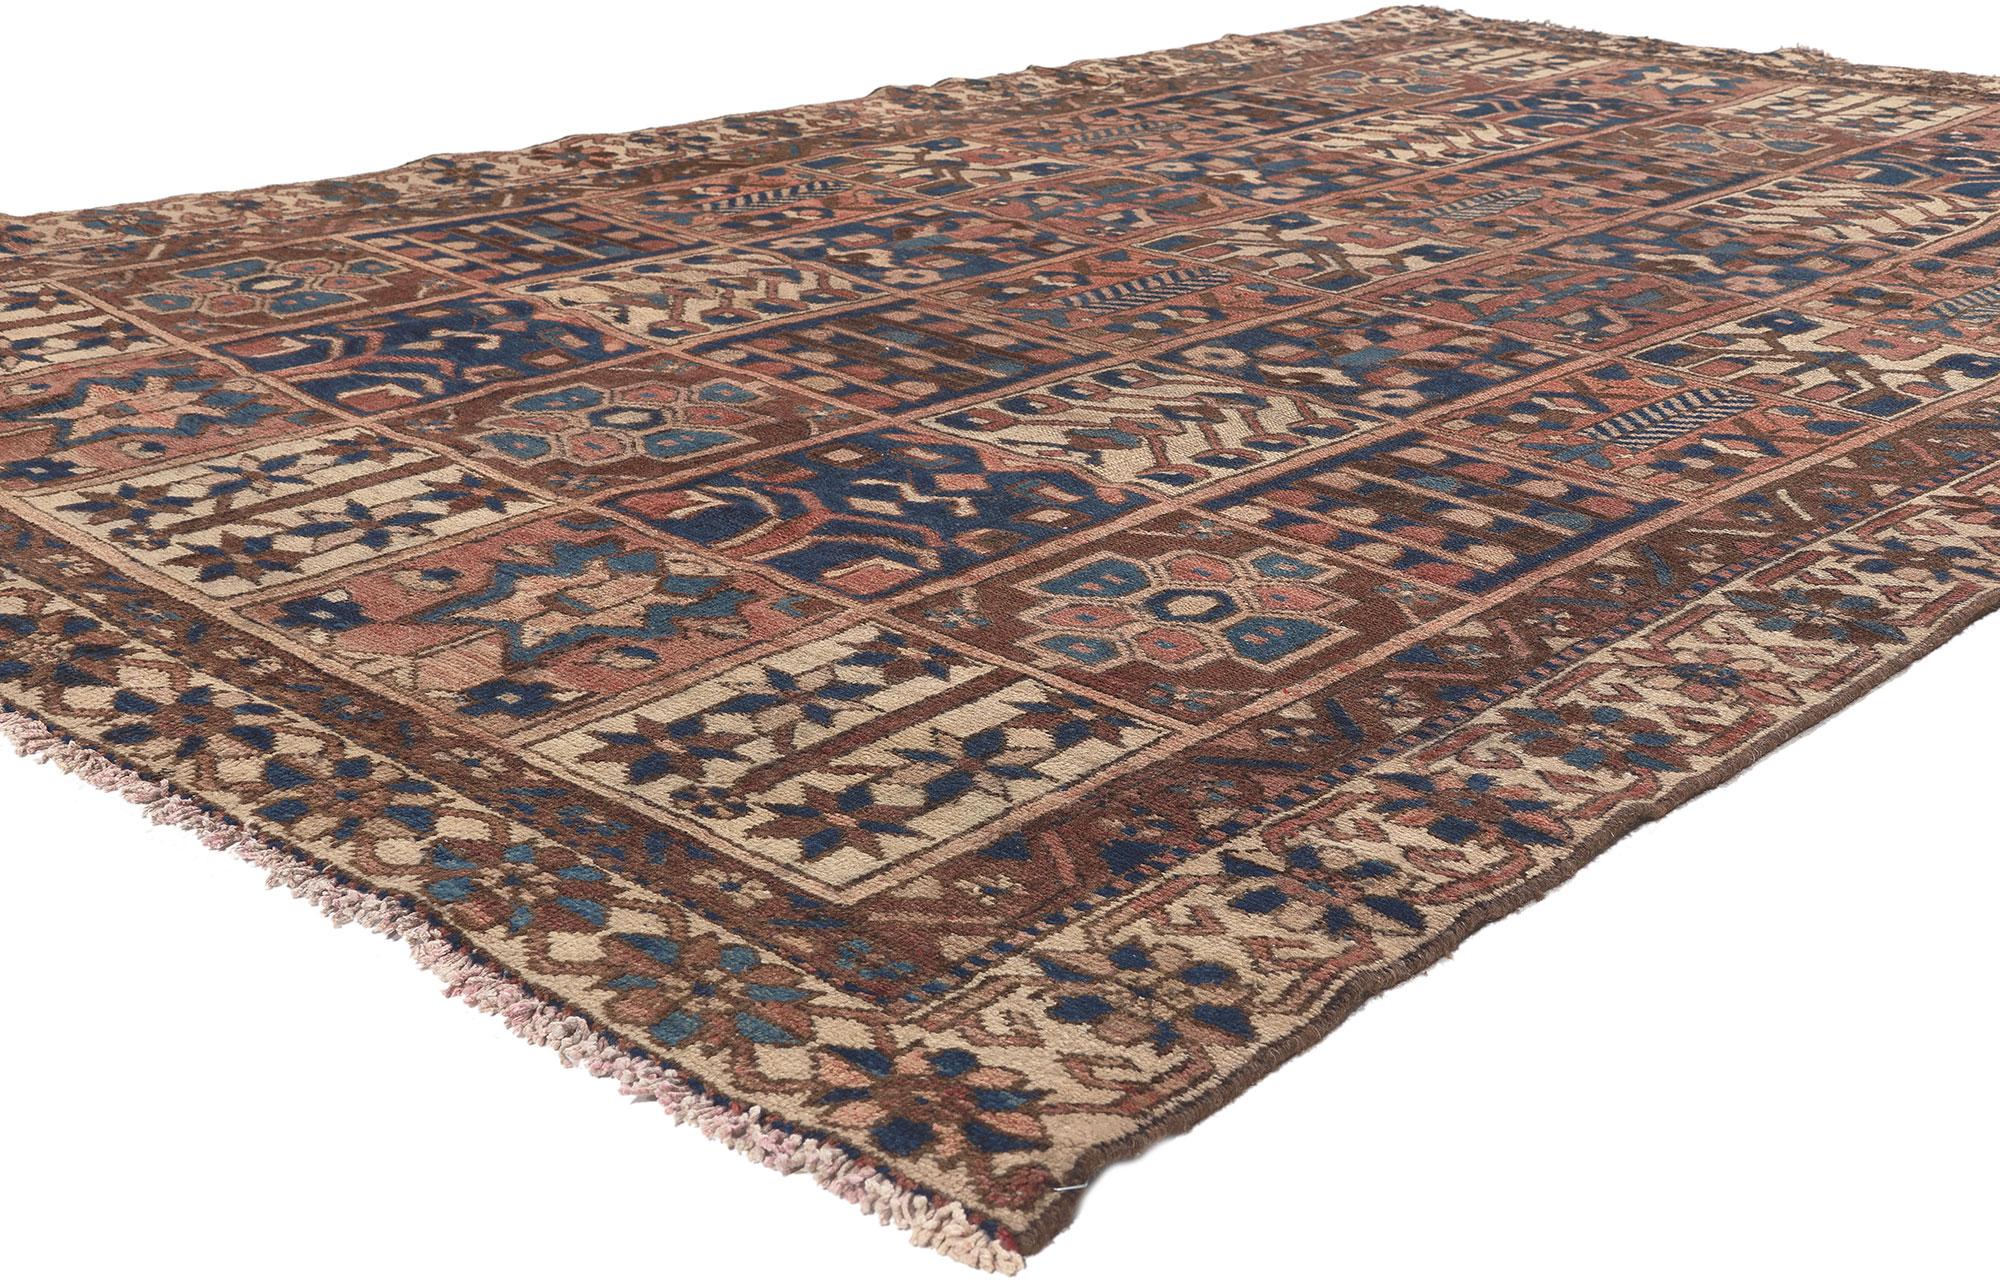 75872 Vintage Persian Bakhtiari Rug, 06'01 X 09'05.
Biophilic Design meets esoteric elegance in this vintage Persian Bakhtiari rug. The four seasons garden design and warm earth-tone colors woven into this piece work together creating a